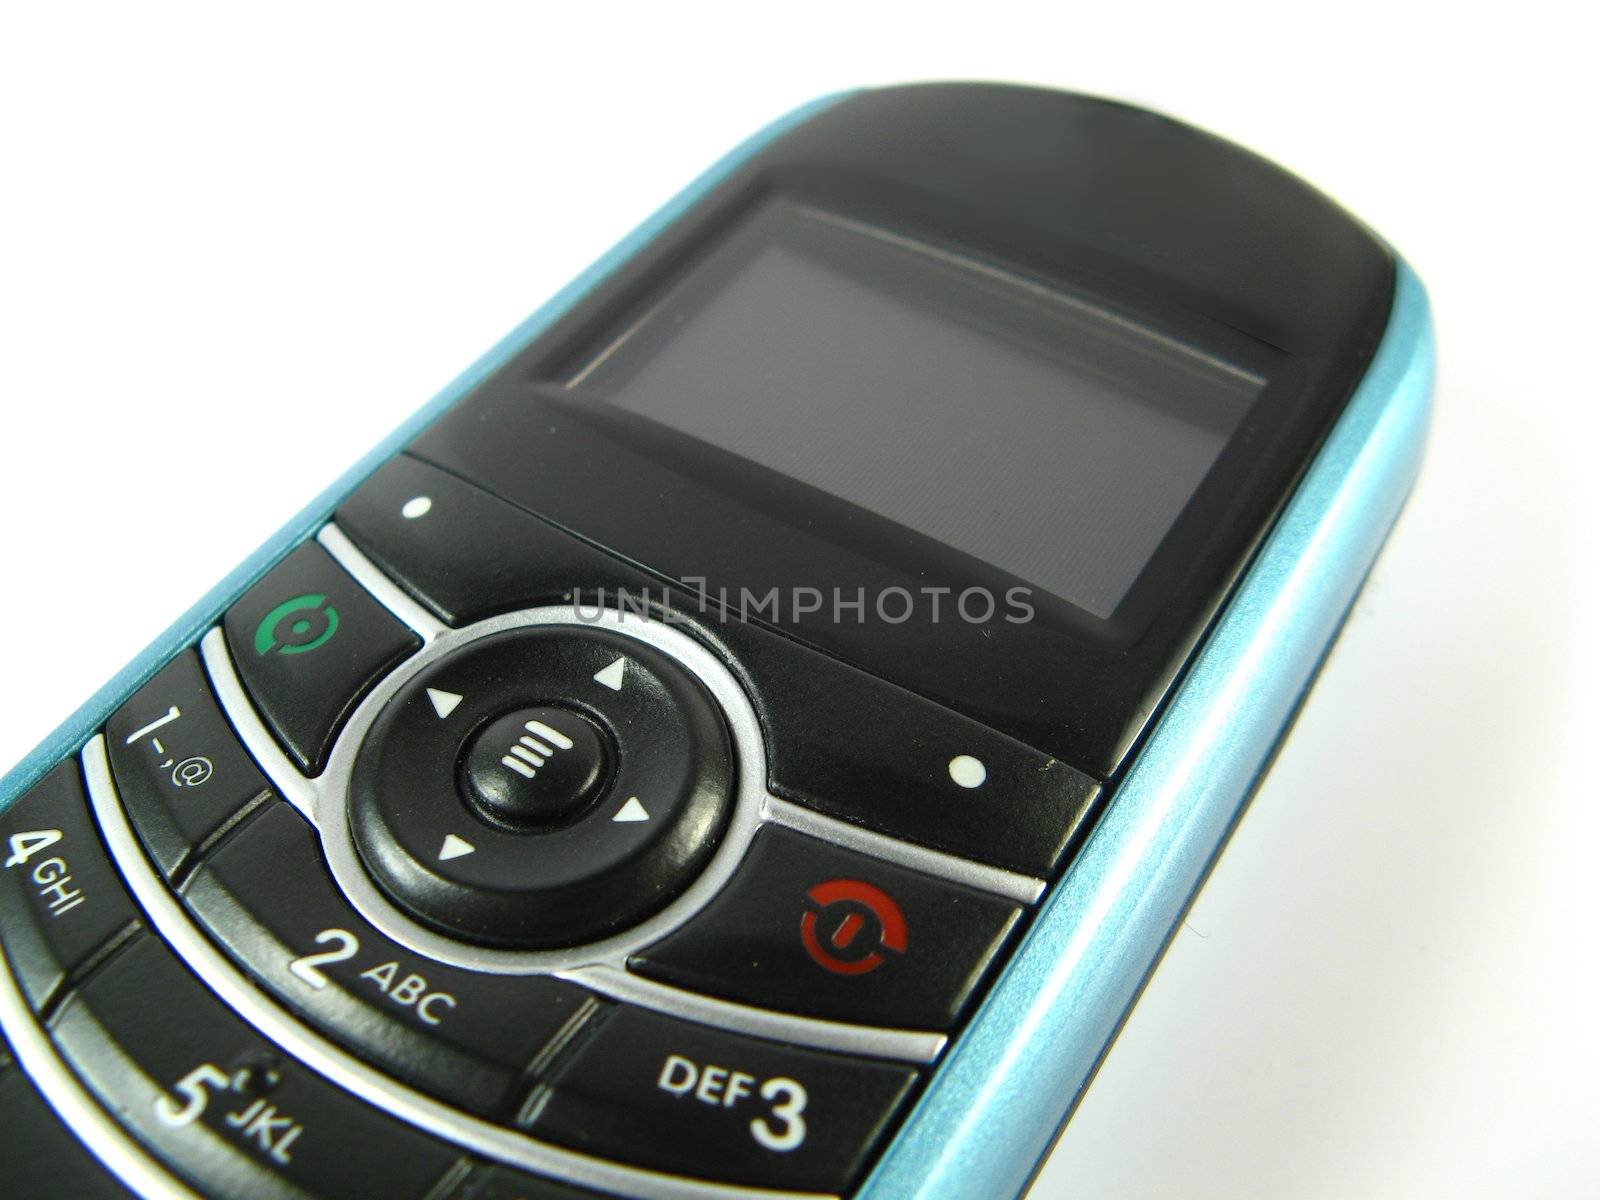 close-up of a blue phone on a white background